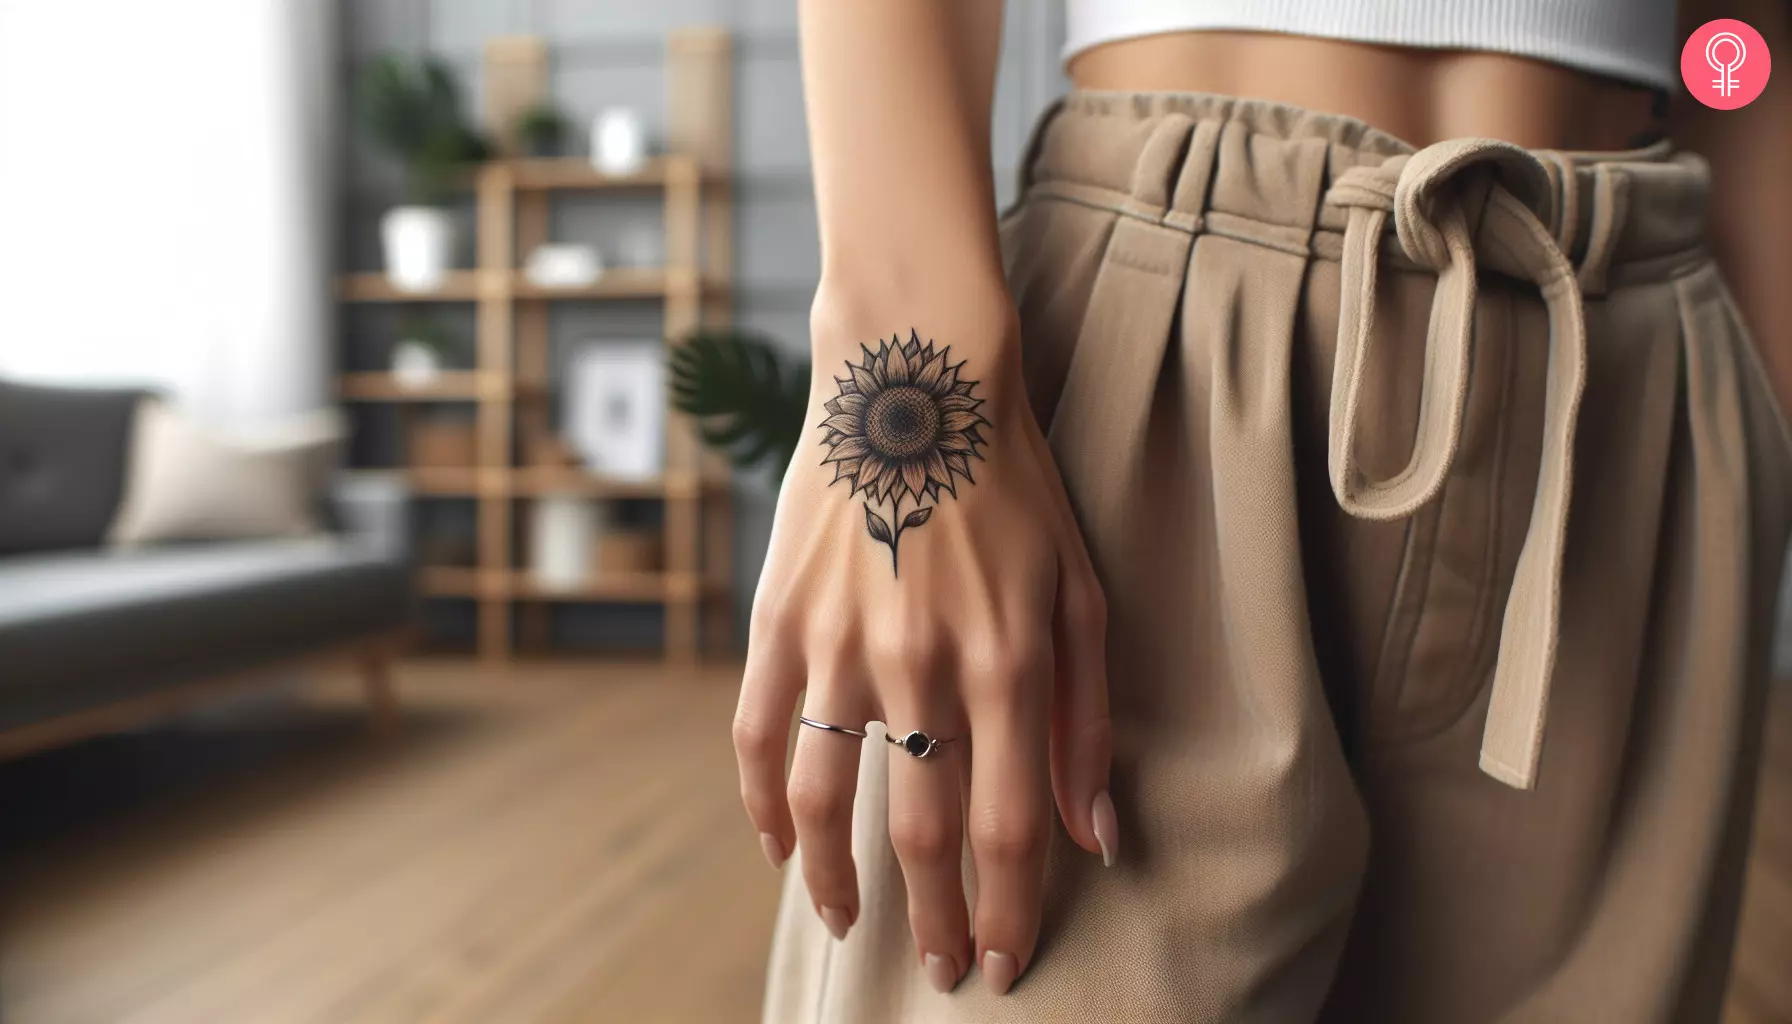 A micro realism flower tattoo on the back of the hand